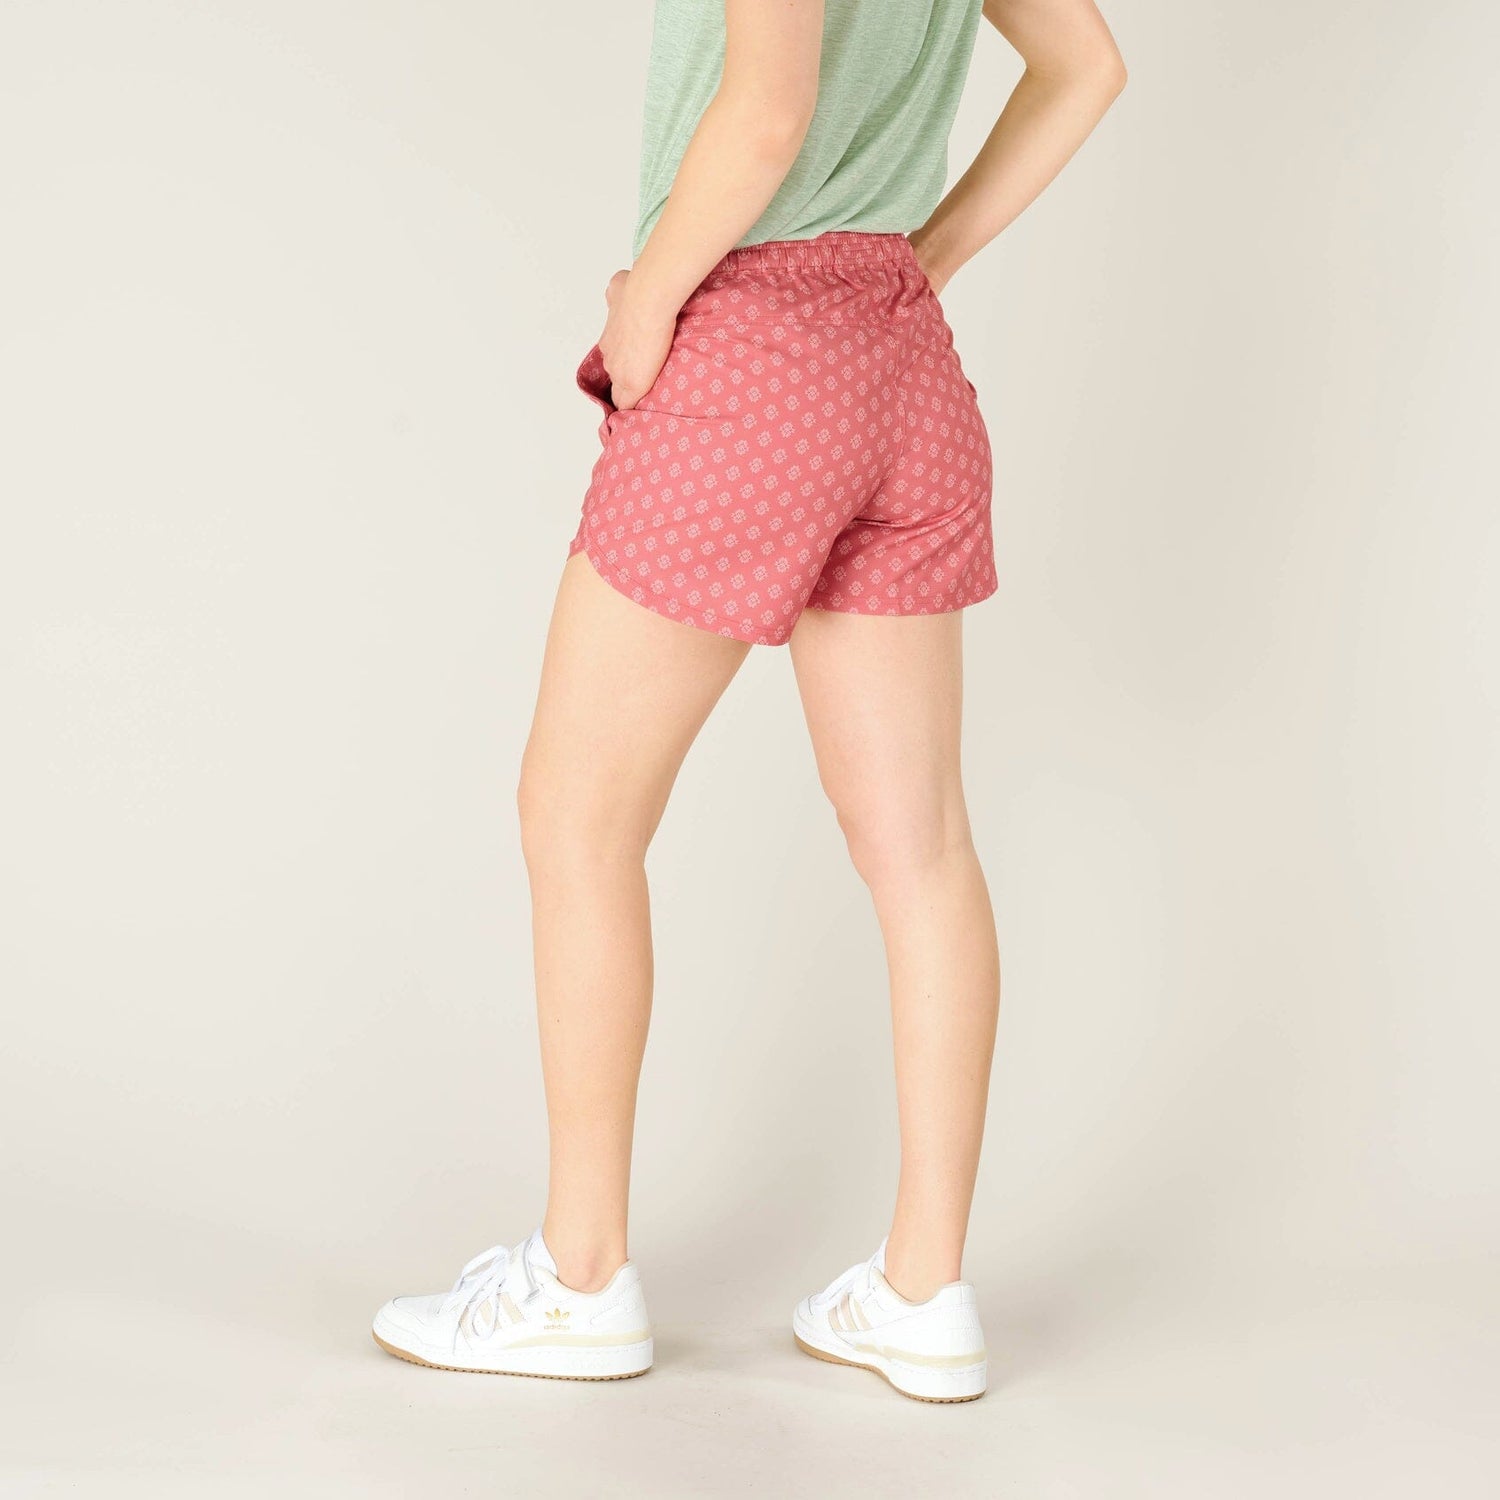 Sherpa - W's Sajilo Pull-On Short - 100% Recycled polyester - Weekendbee - sustainable sportswear